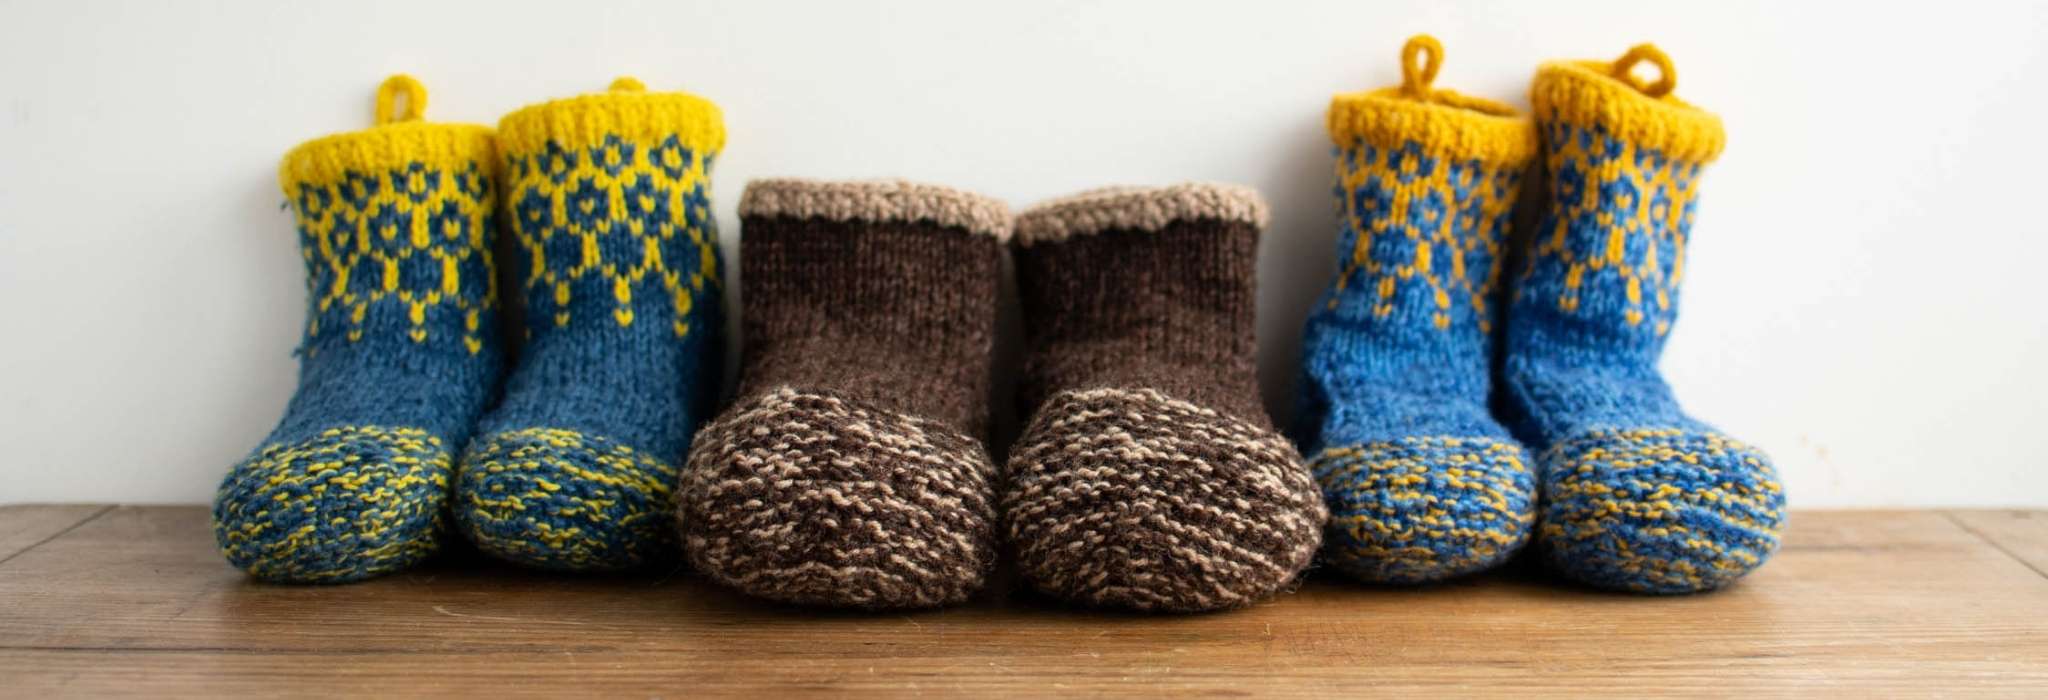 three pairs of knitted slippers lined up against a wall on a wooden surface. The pairs at either end are blue and yellow and the central pair are knitting in shades of brown.